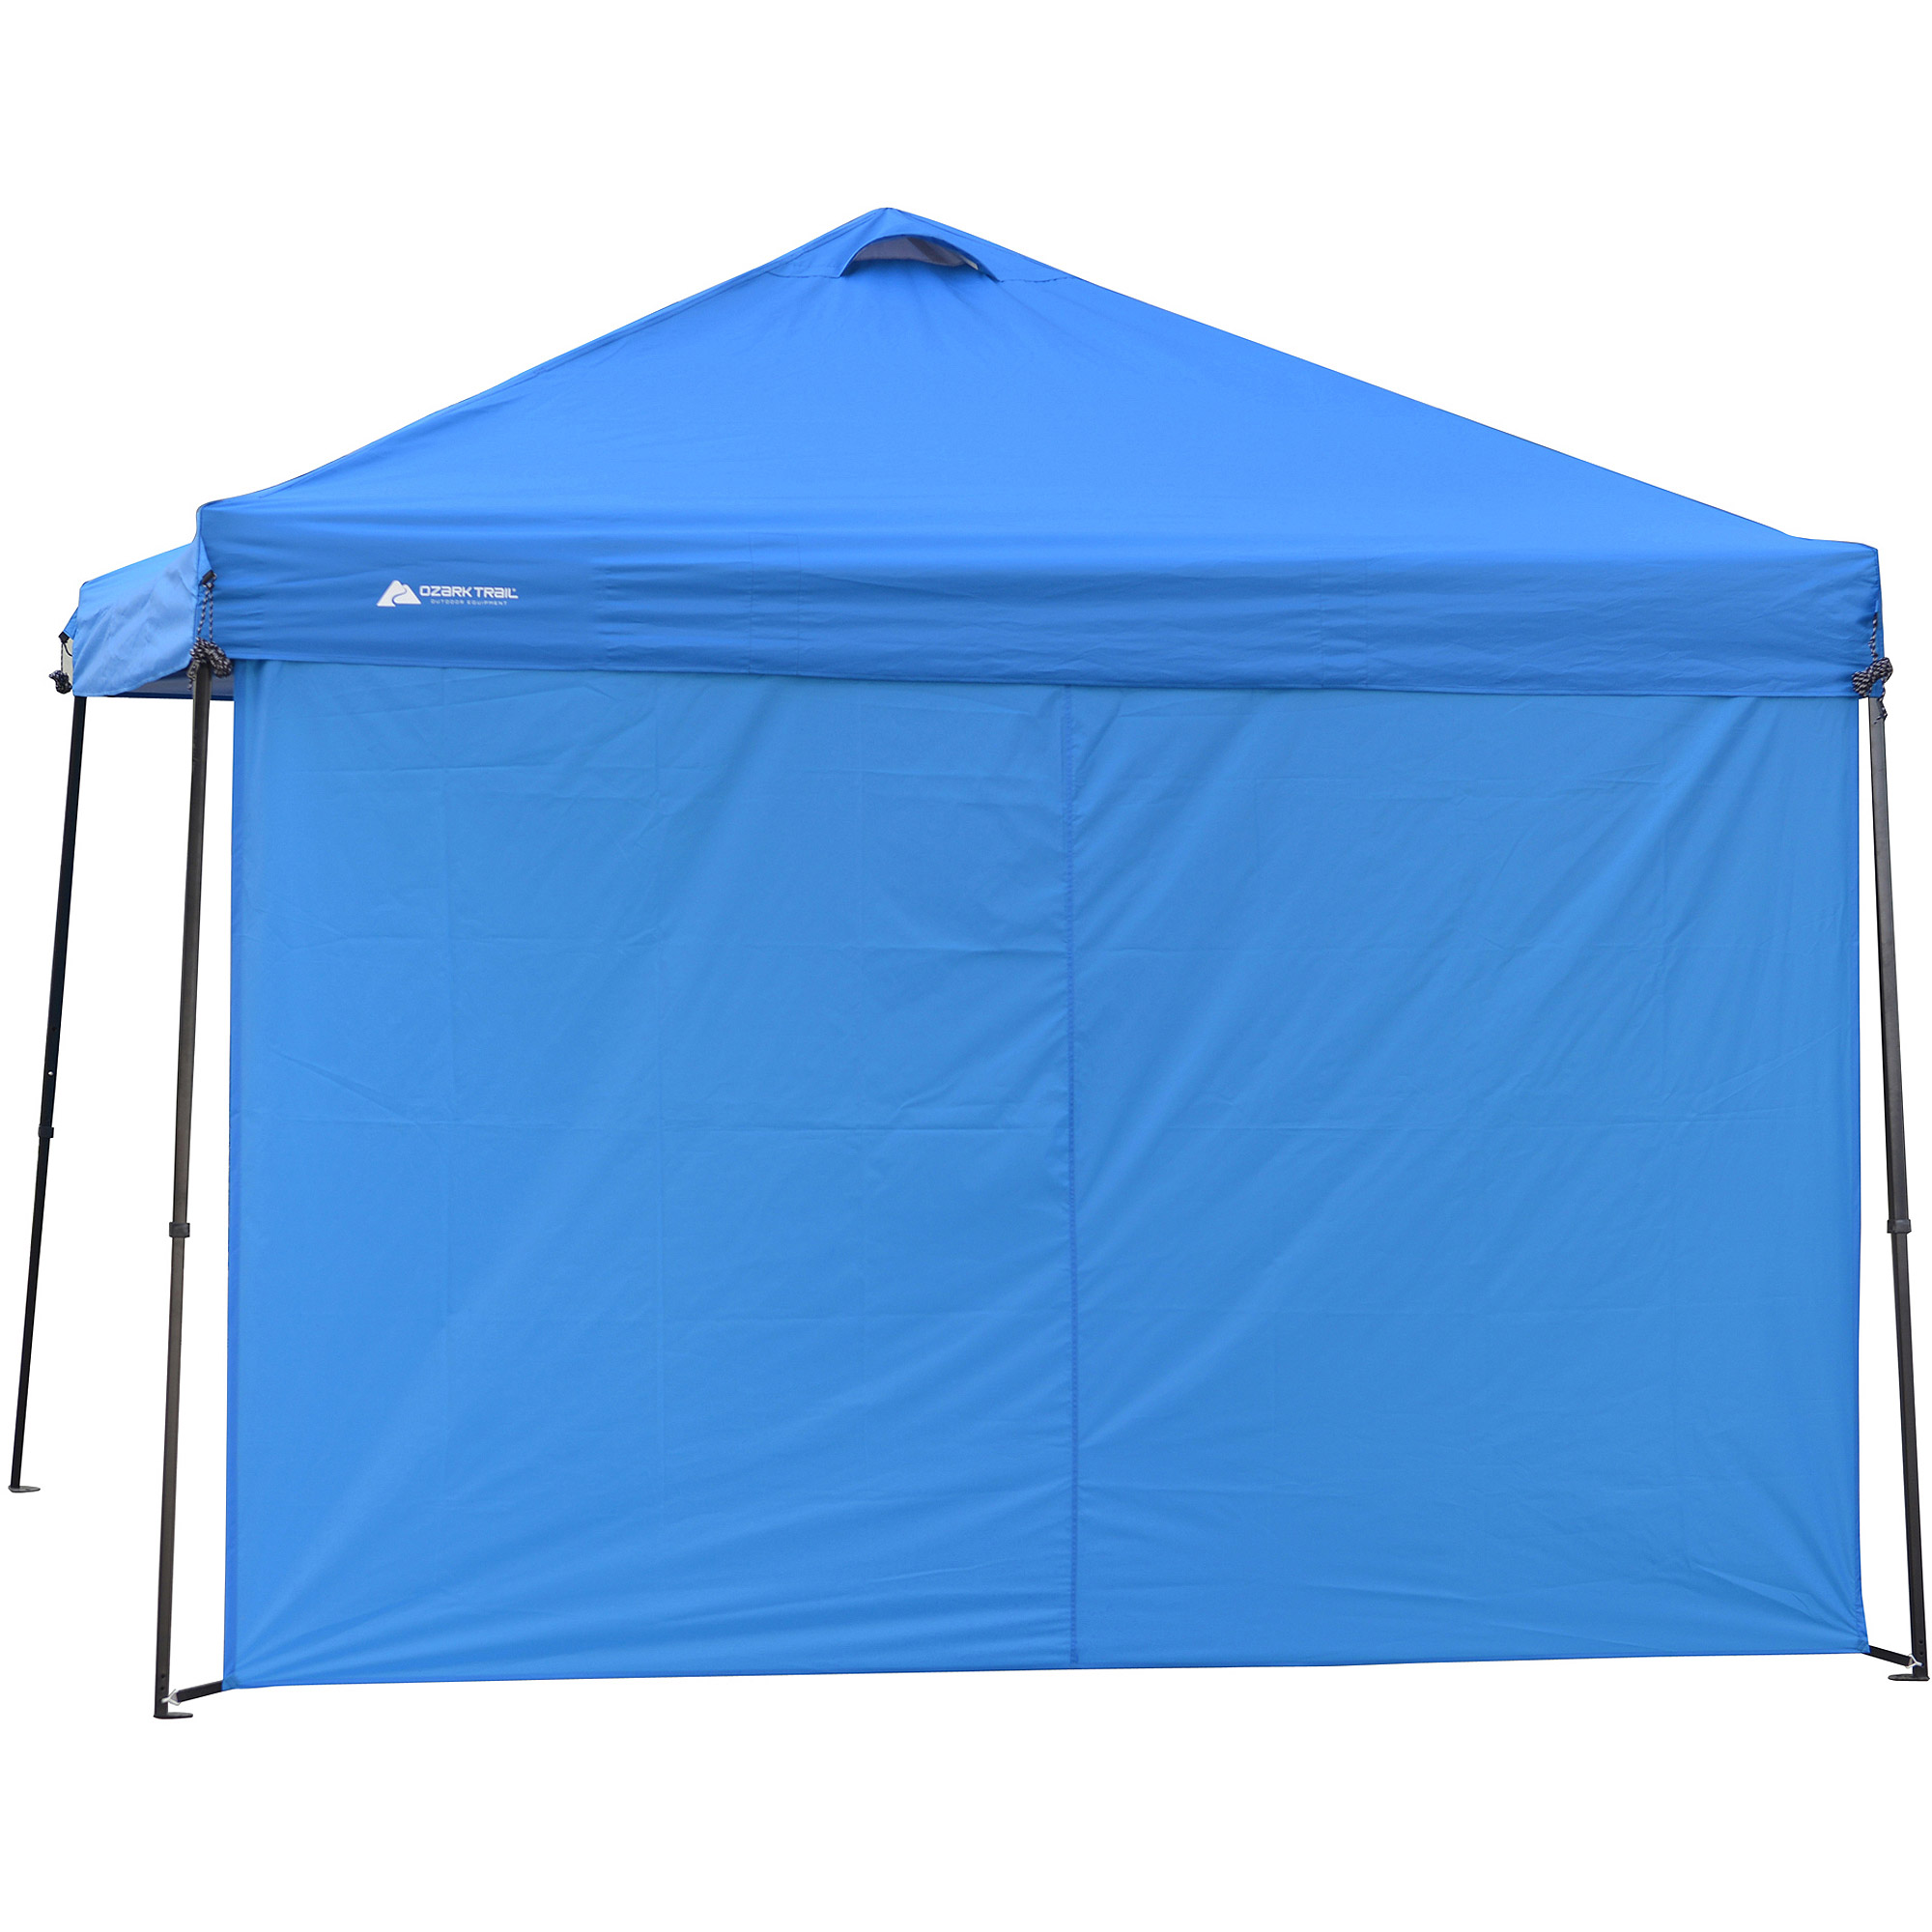 Ozark Trail Sun Wall for 10' x 10' Instant Straight Leg Pop-up Canopy (Accessory Only), Blue - image 3 of 7